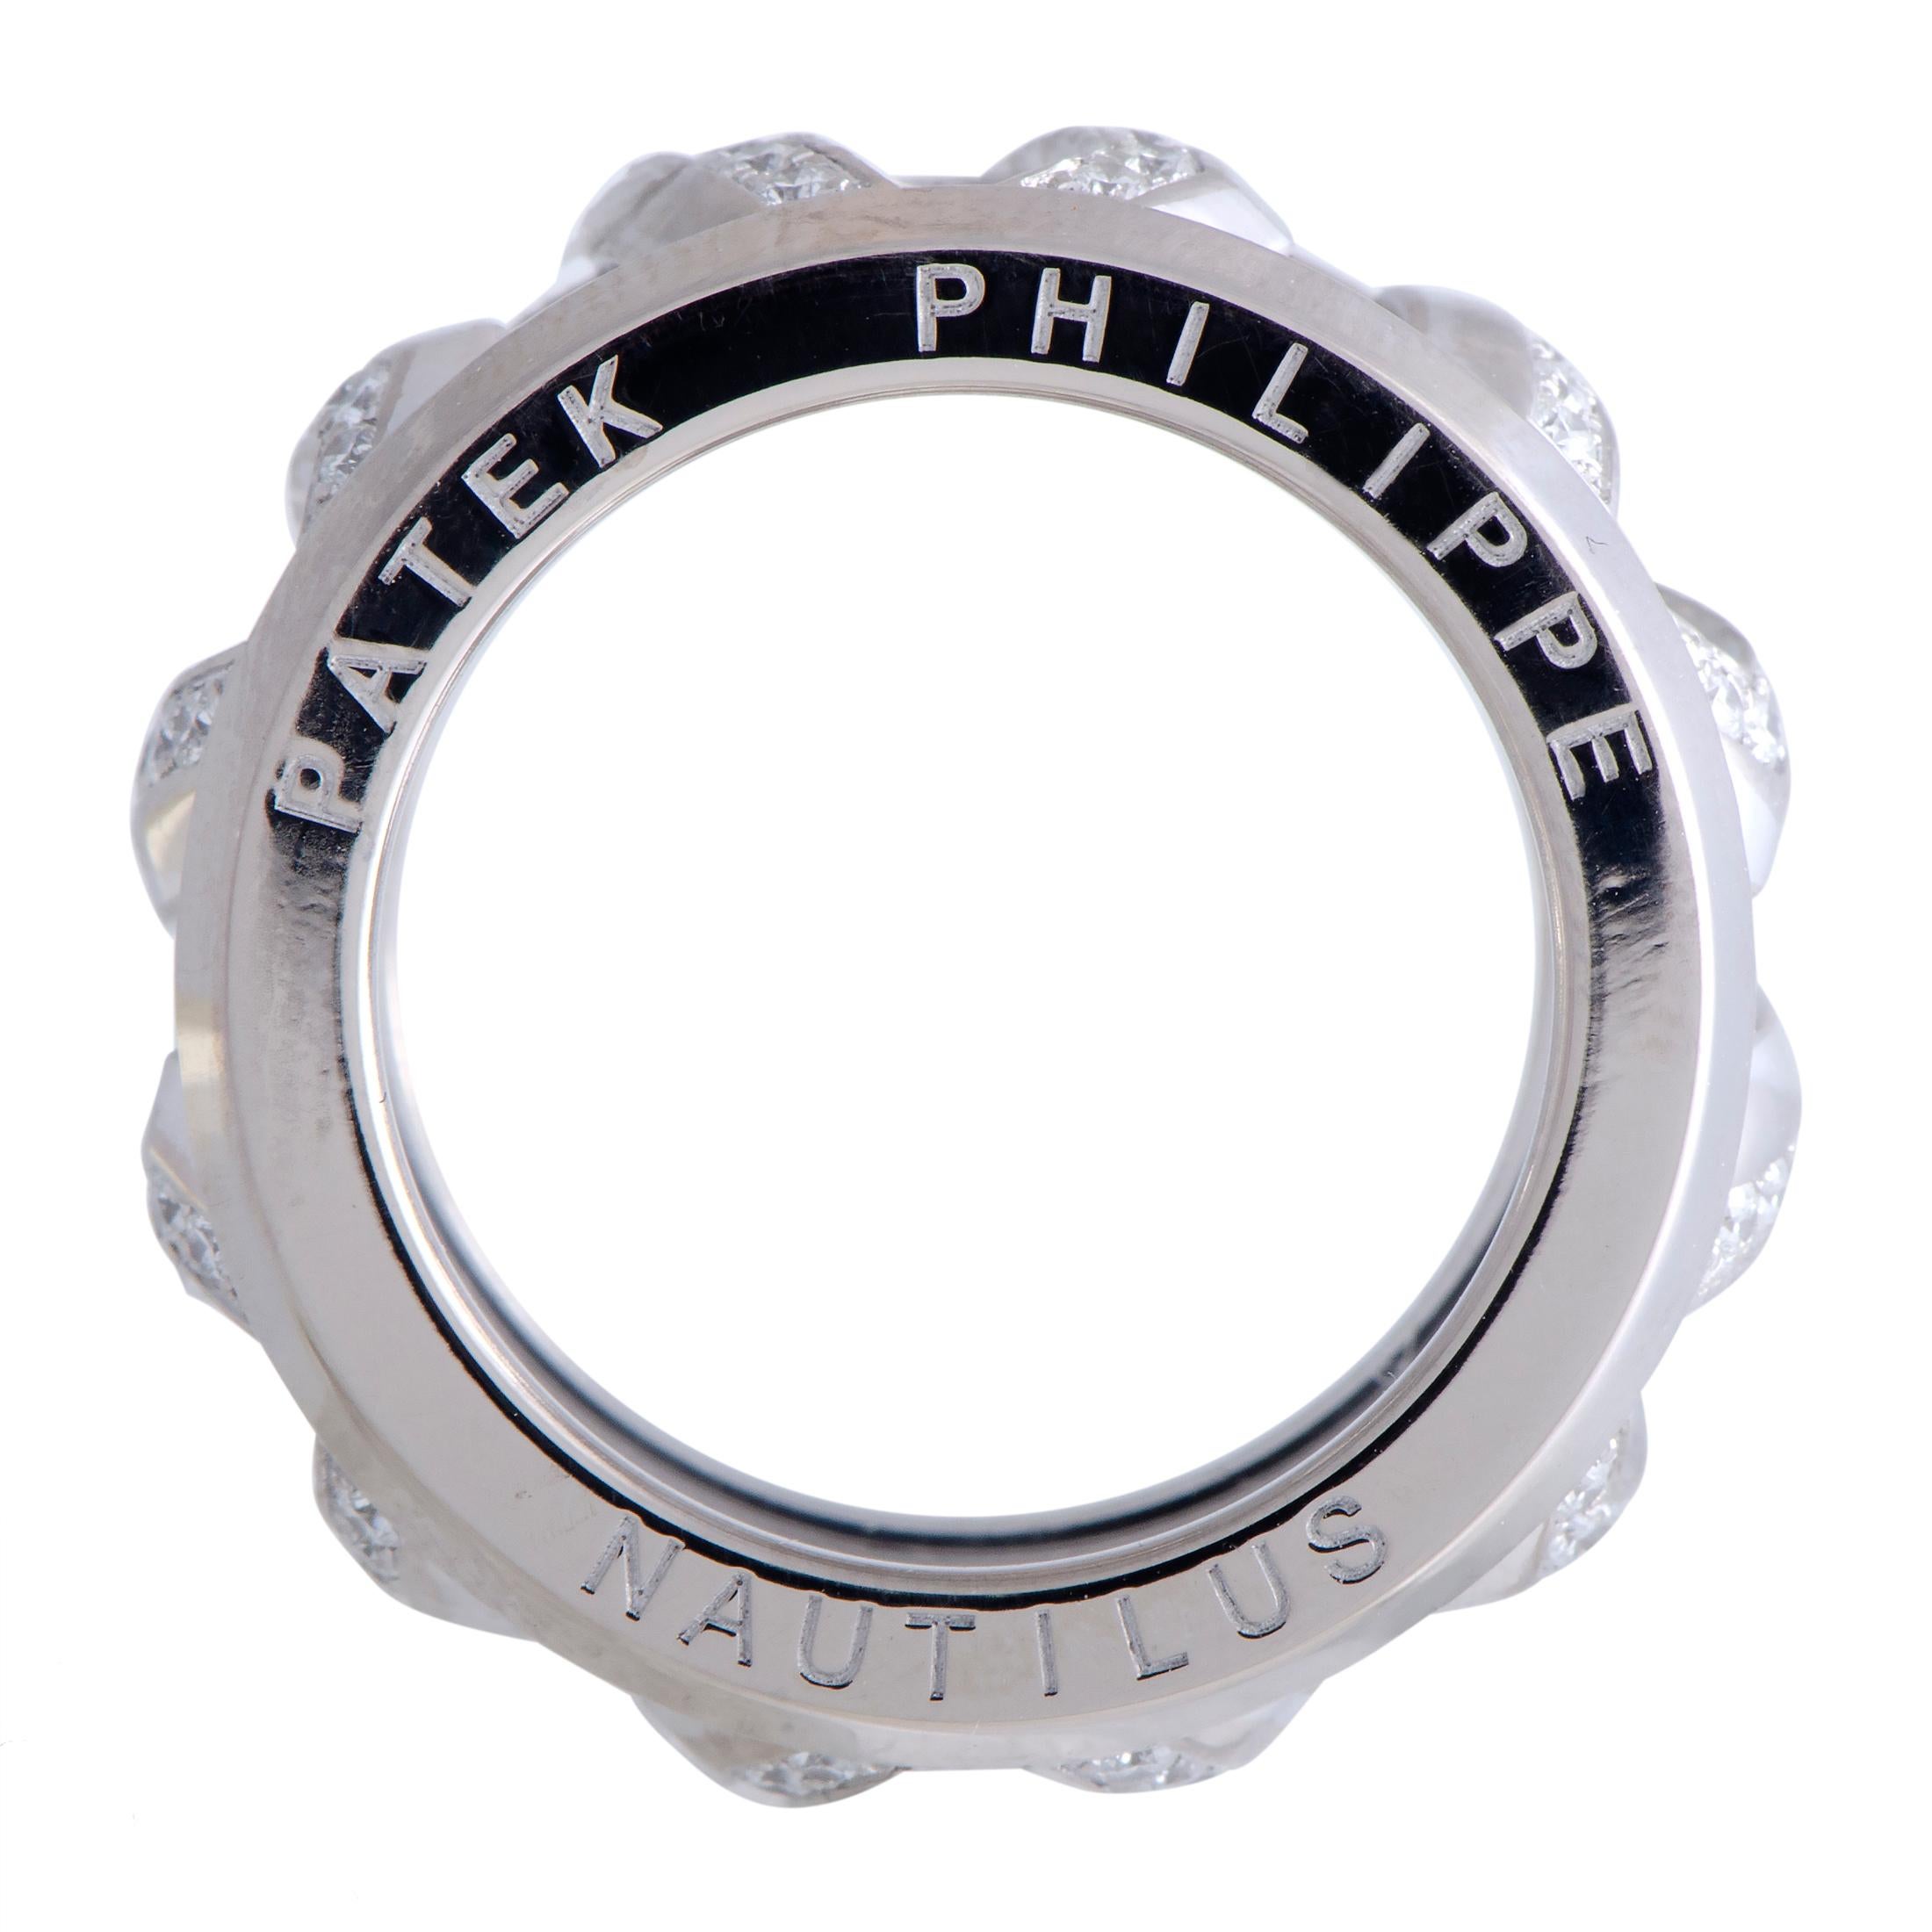 Created for the prestigious “Nautilus” collection by Patek Philippe, this exceptional ring boasts a splendidly refined design that gives it a distinctly sophisticated appeal. The ring is masterfully crafted from elegant 18K white gold and